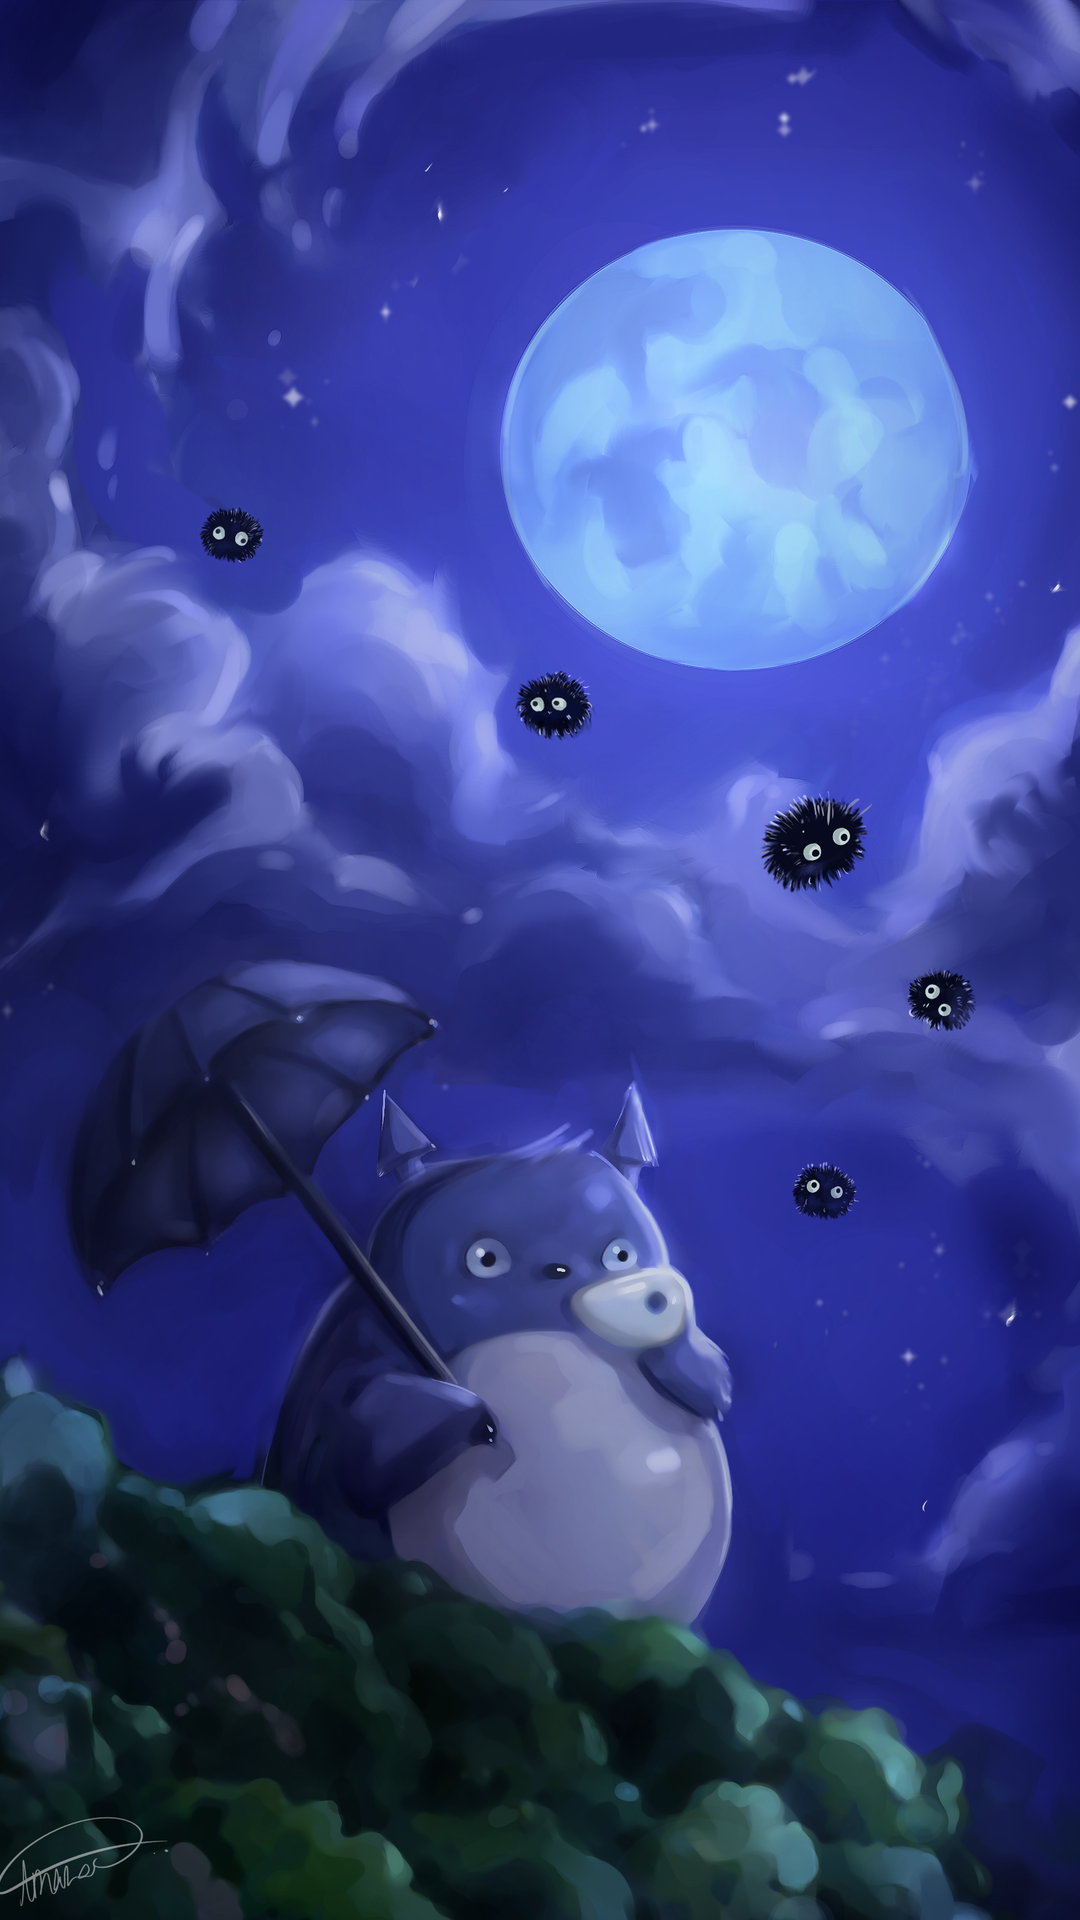 My Neighbor Totoro Wallpaper for iPhone and Android